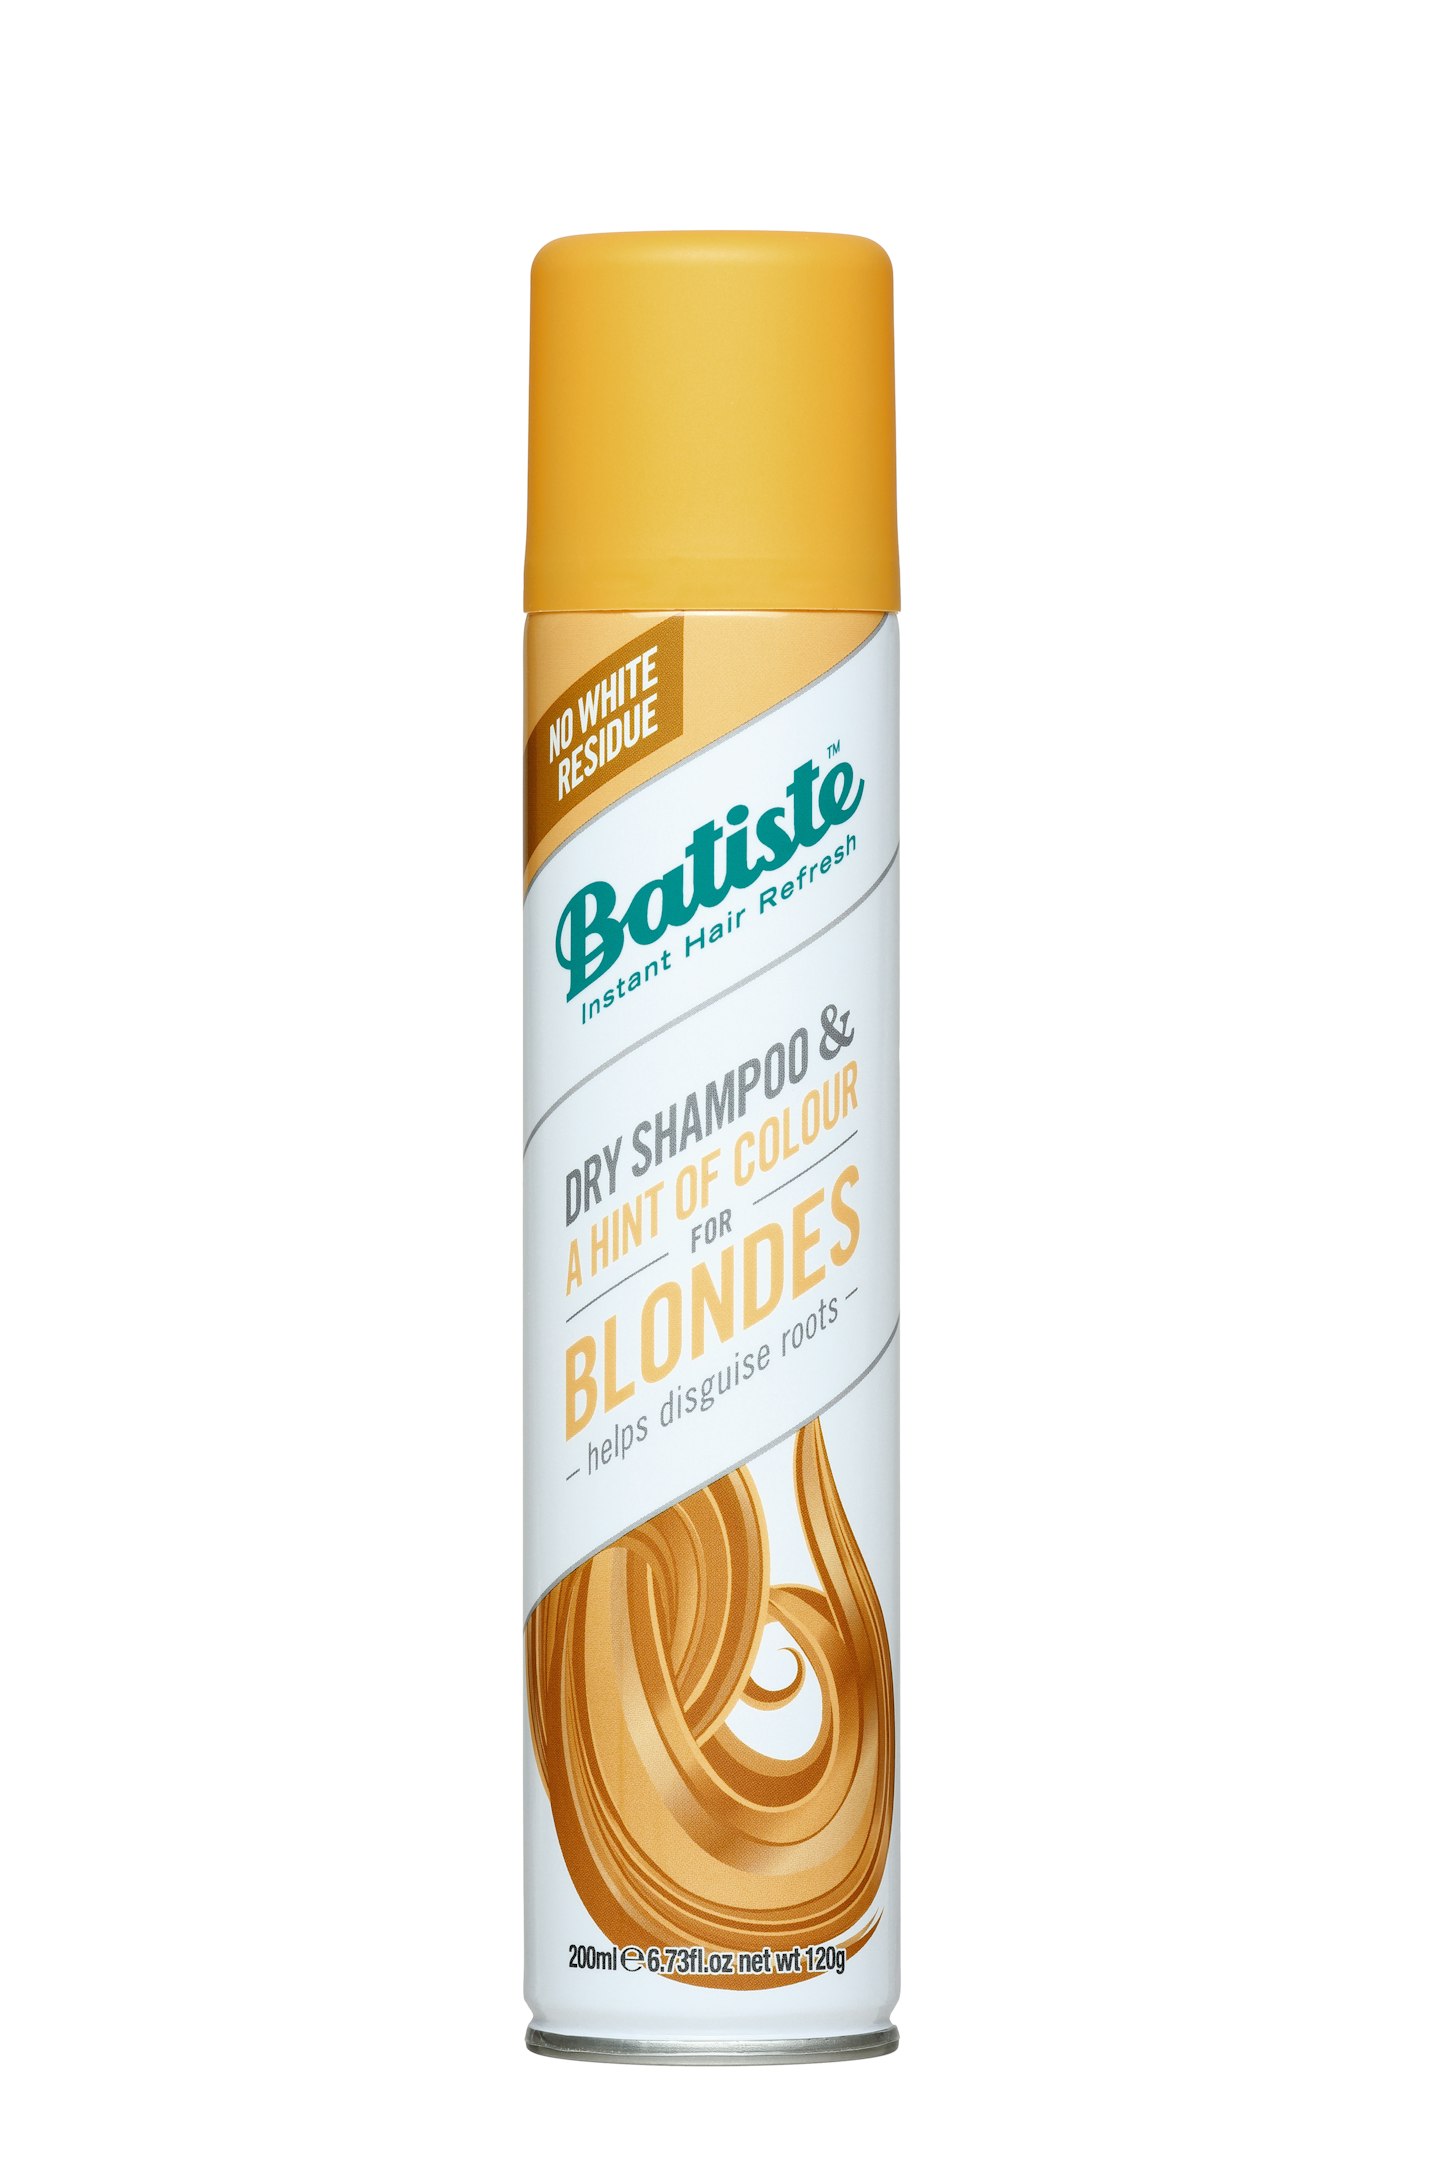 Batiste - Dry shampoo and a hint of color for blondes